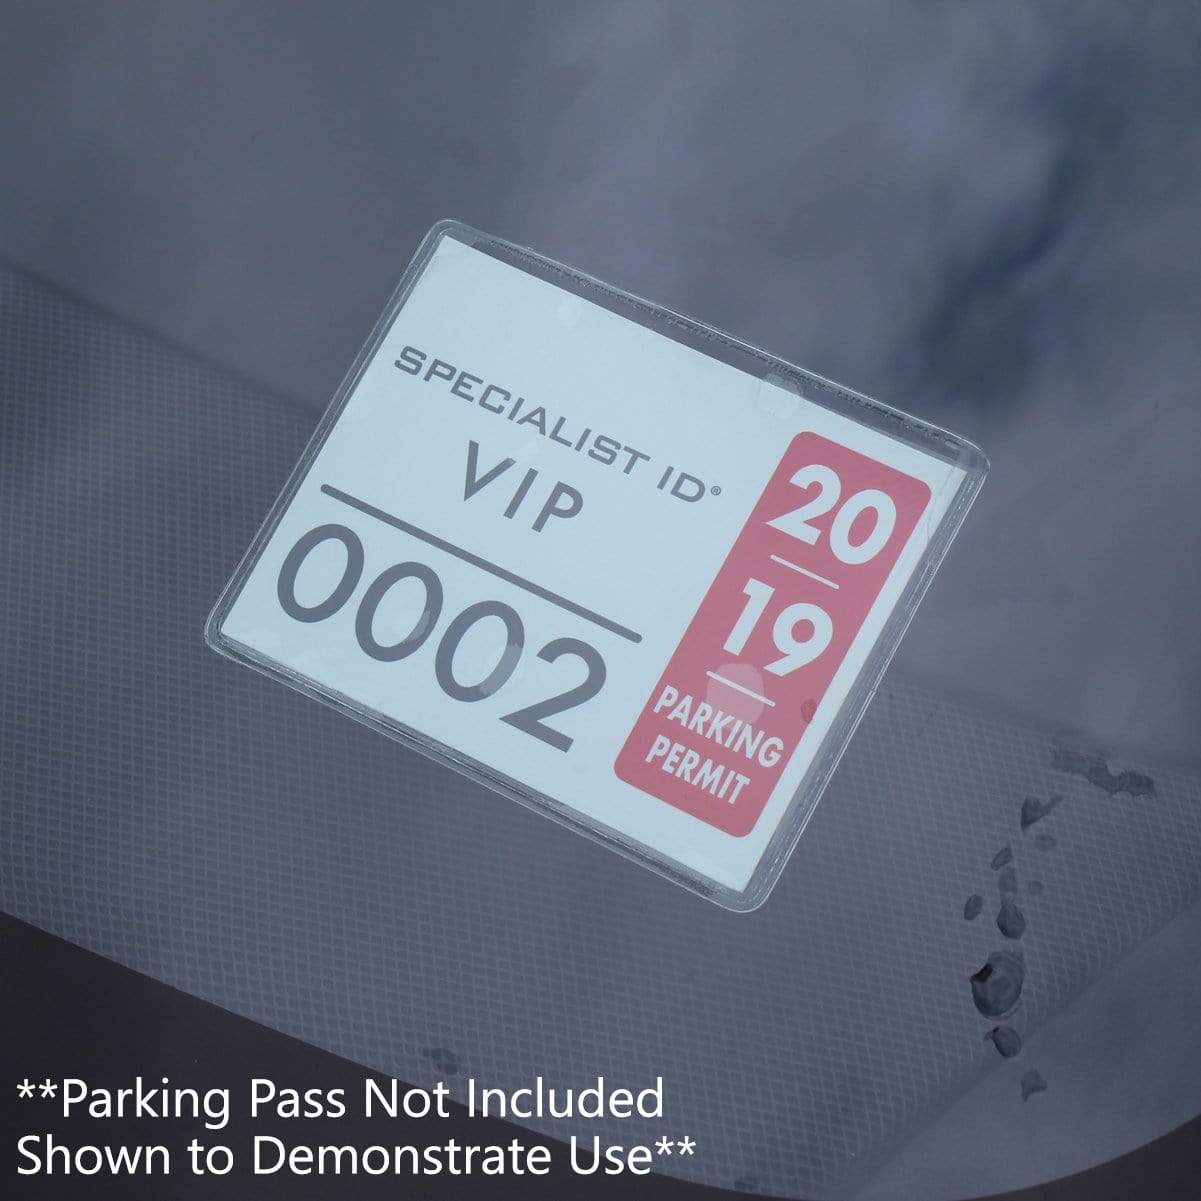 Large 4 x 3 Adhesive Badge Holders with Sticky Back - Clear Vinyl Parking Pass Holders for Windshield (CE-4P)